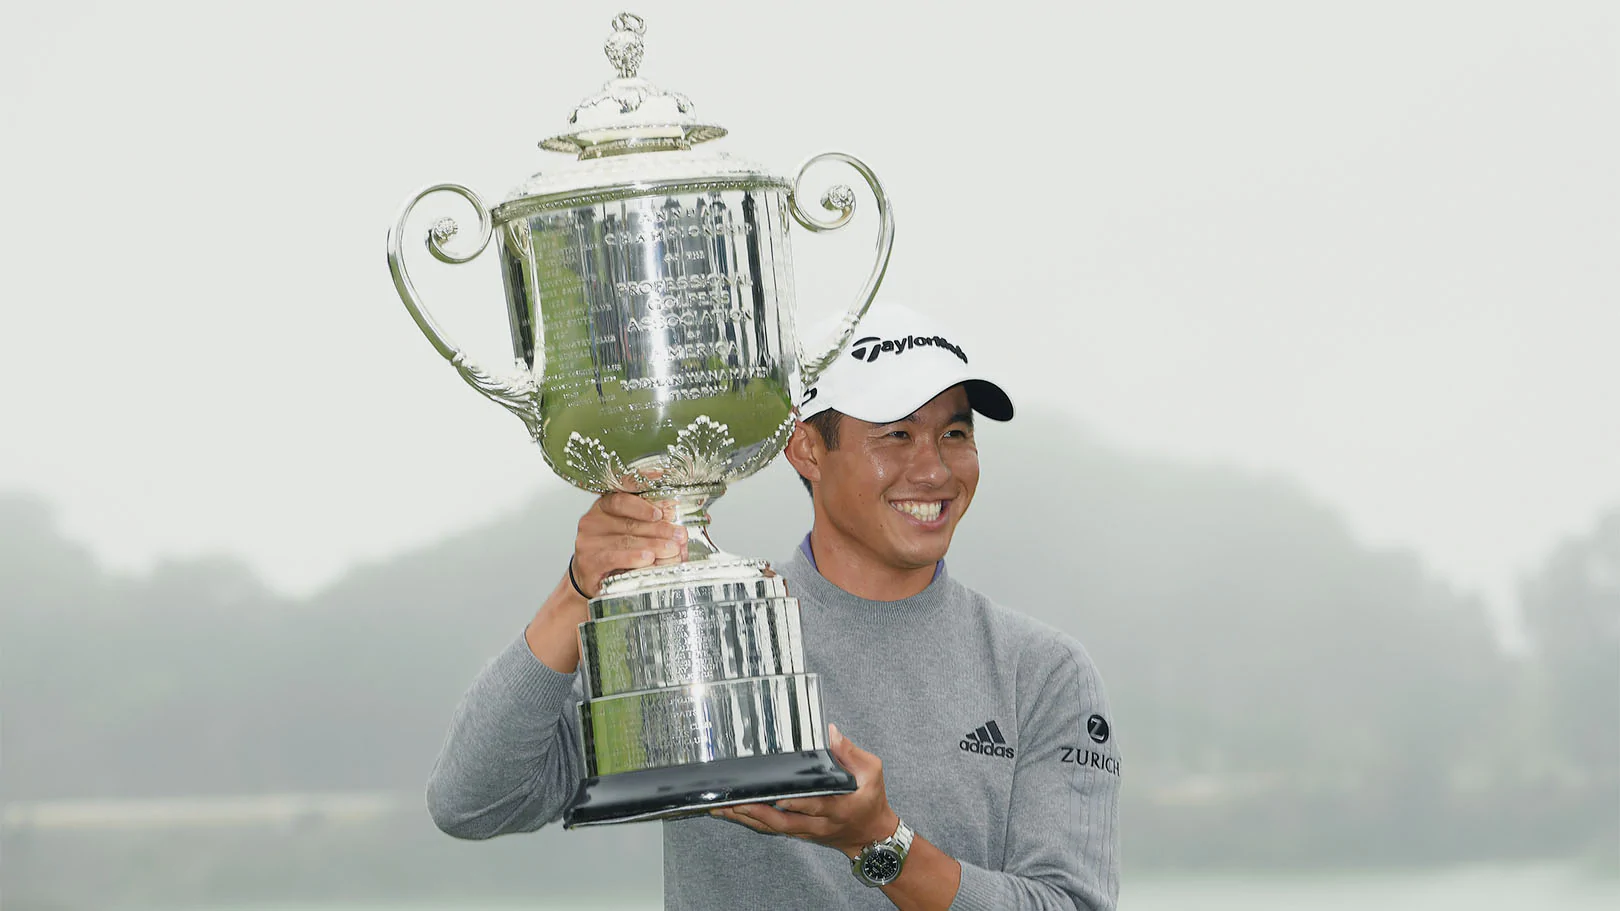 Collin Morikawa emerges from packed leaderboard, wins first major at PGA